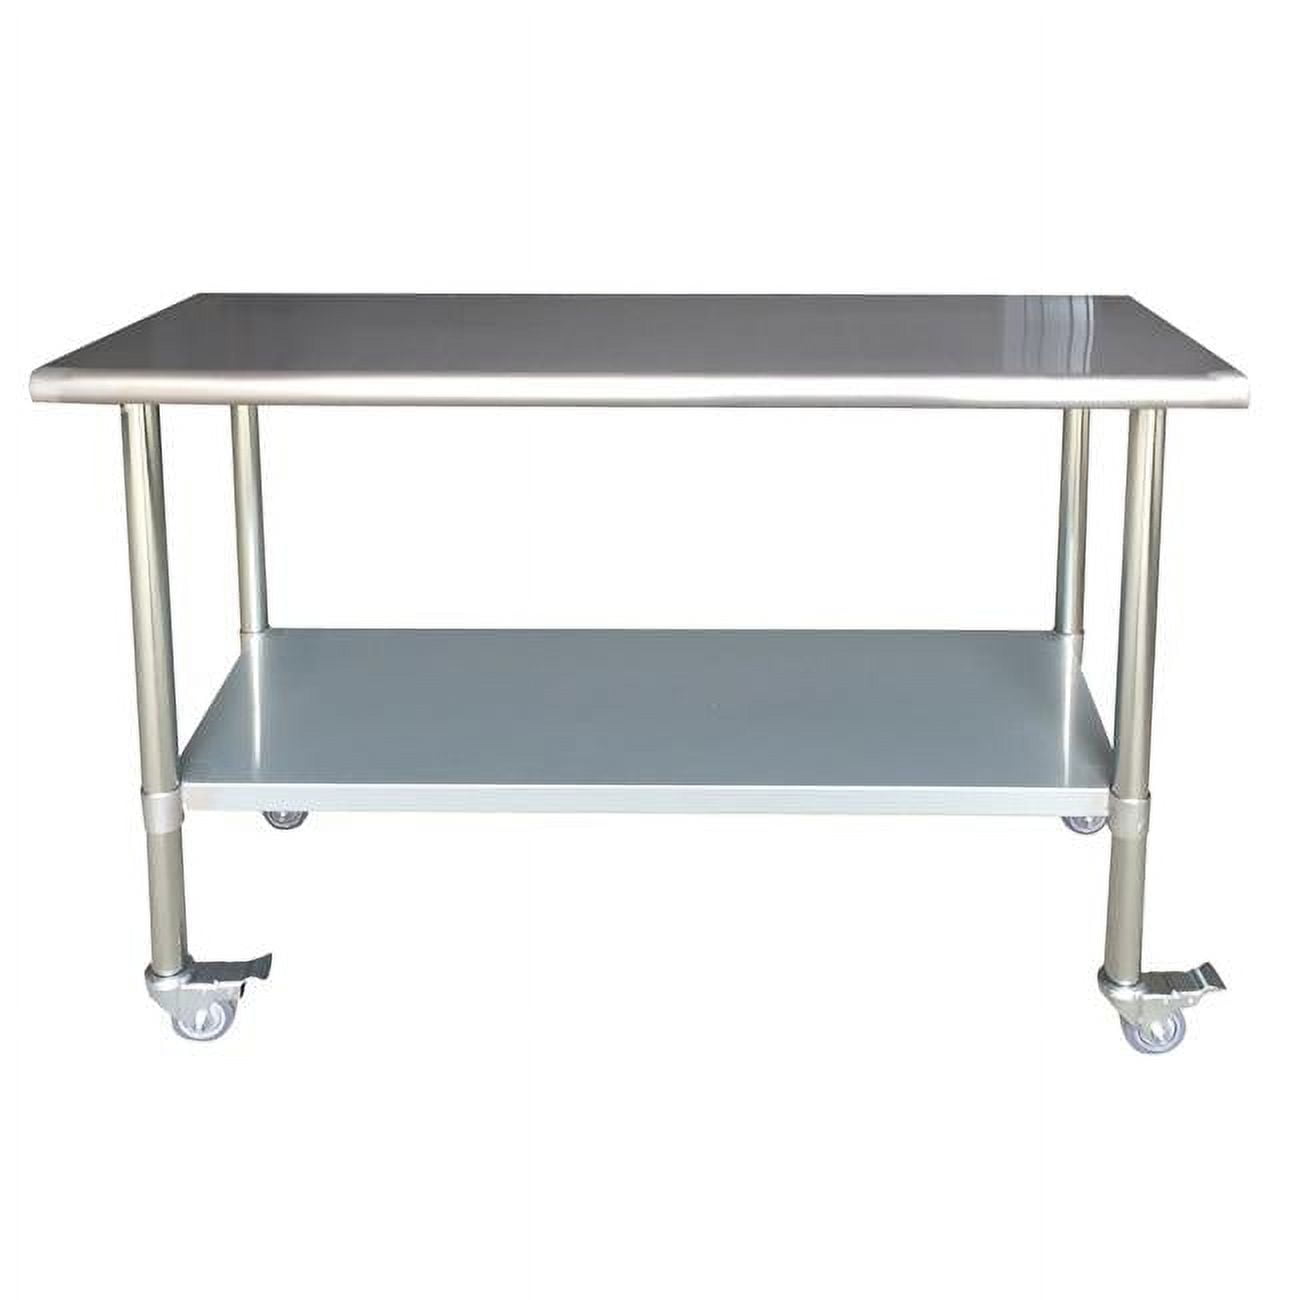 Sswtwc60 24 X 60 In. Stainless Steel Work Table With Casters